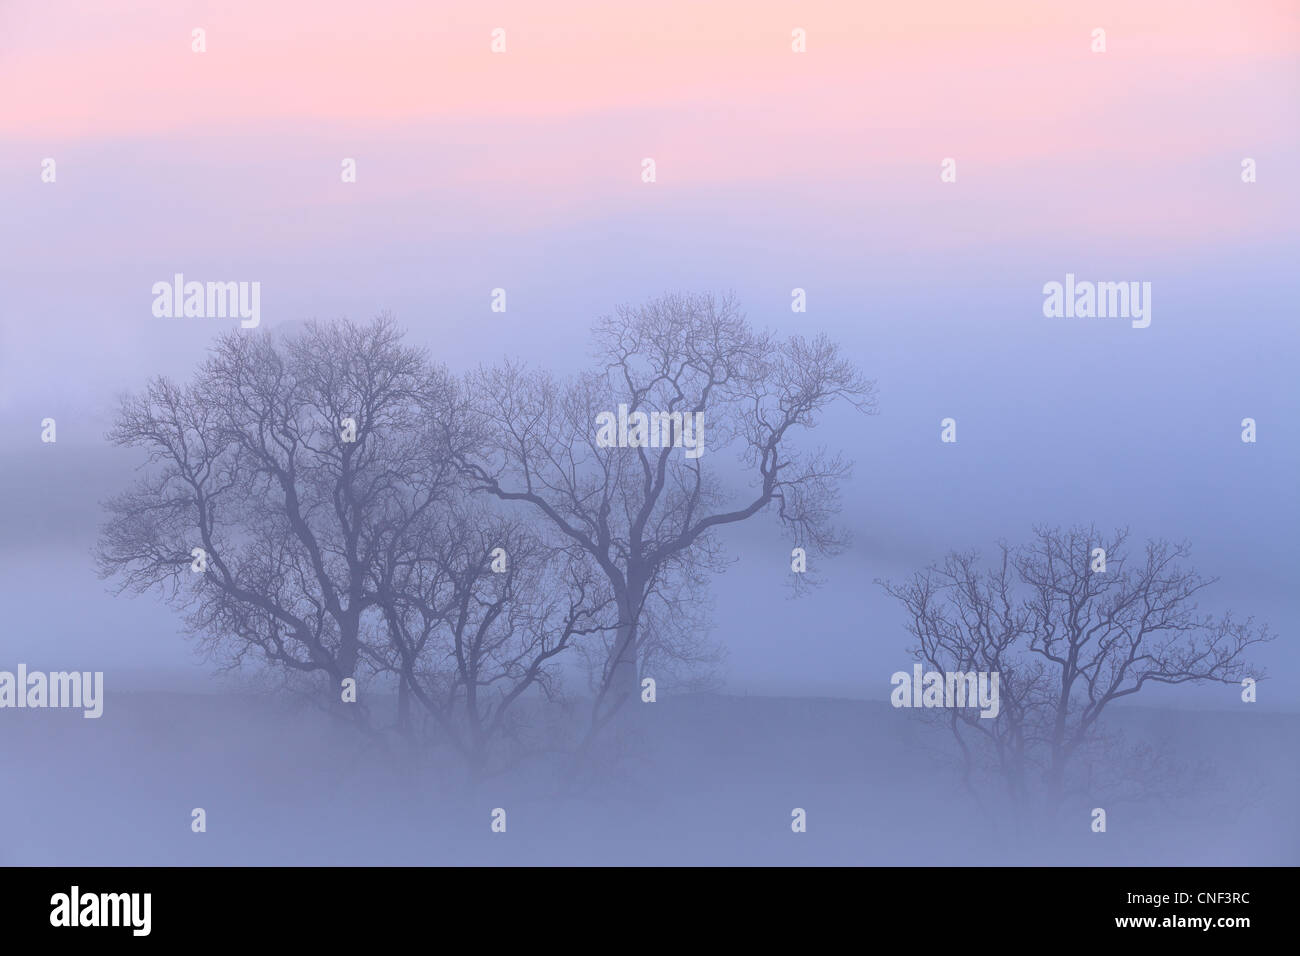 Tree branches surrounded by mist at sunrise near Airton in Malhamdale, Yorkshire Stock Photo